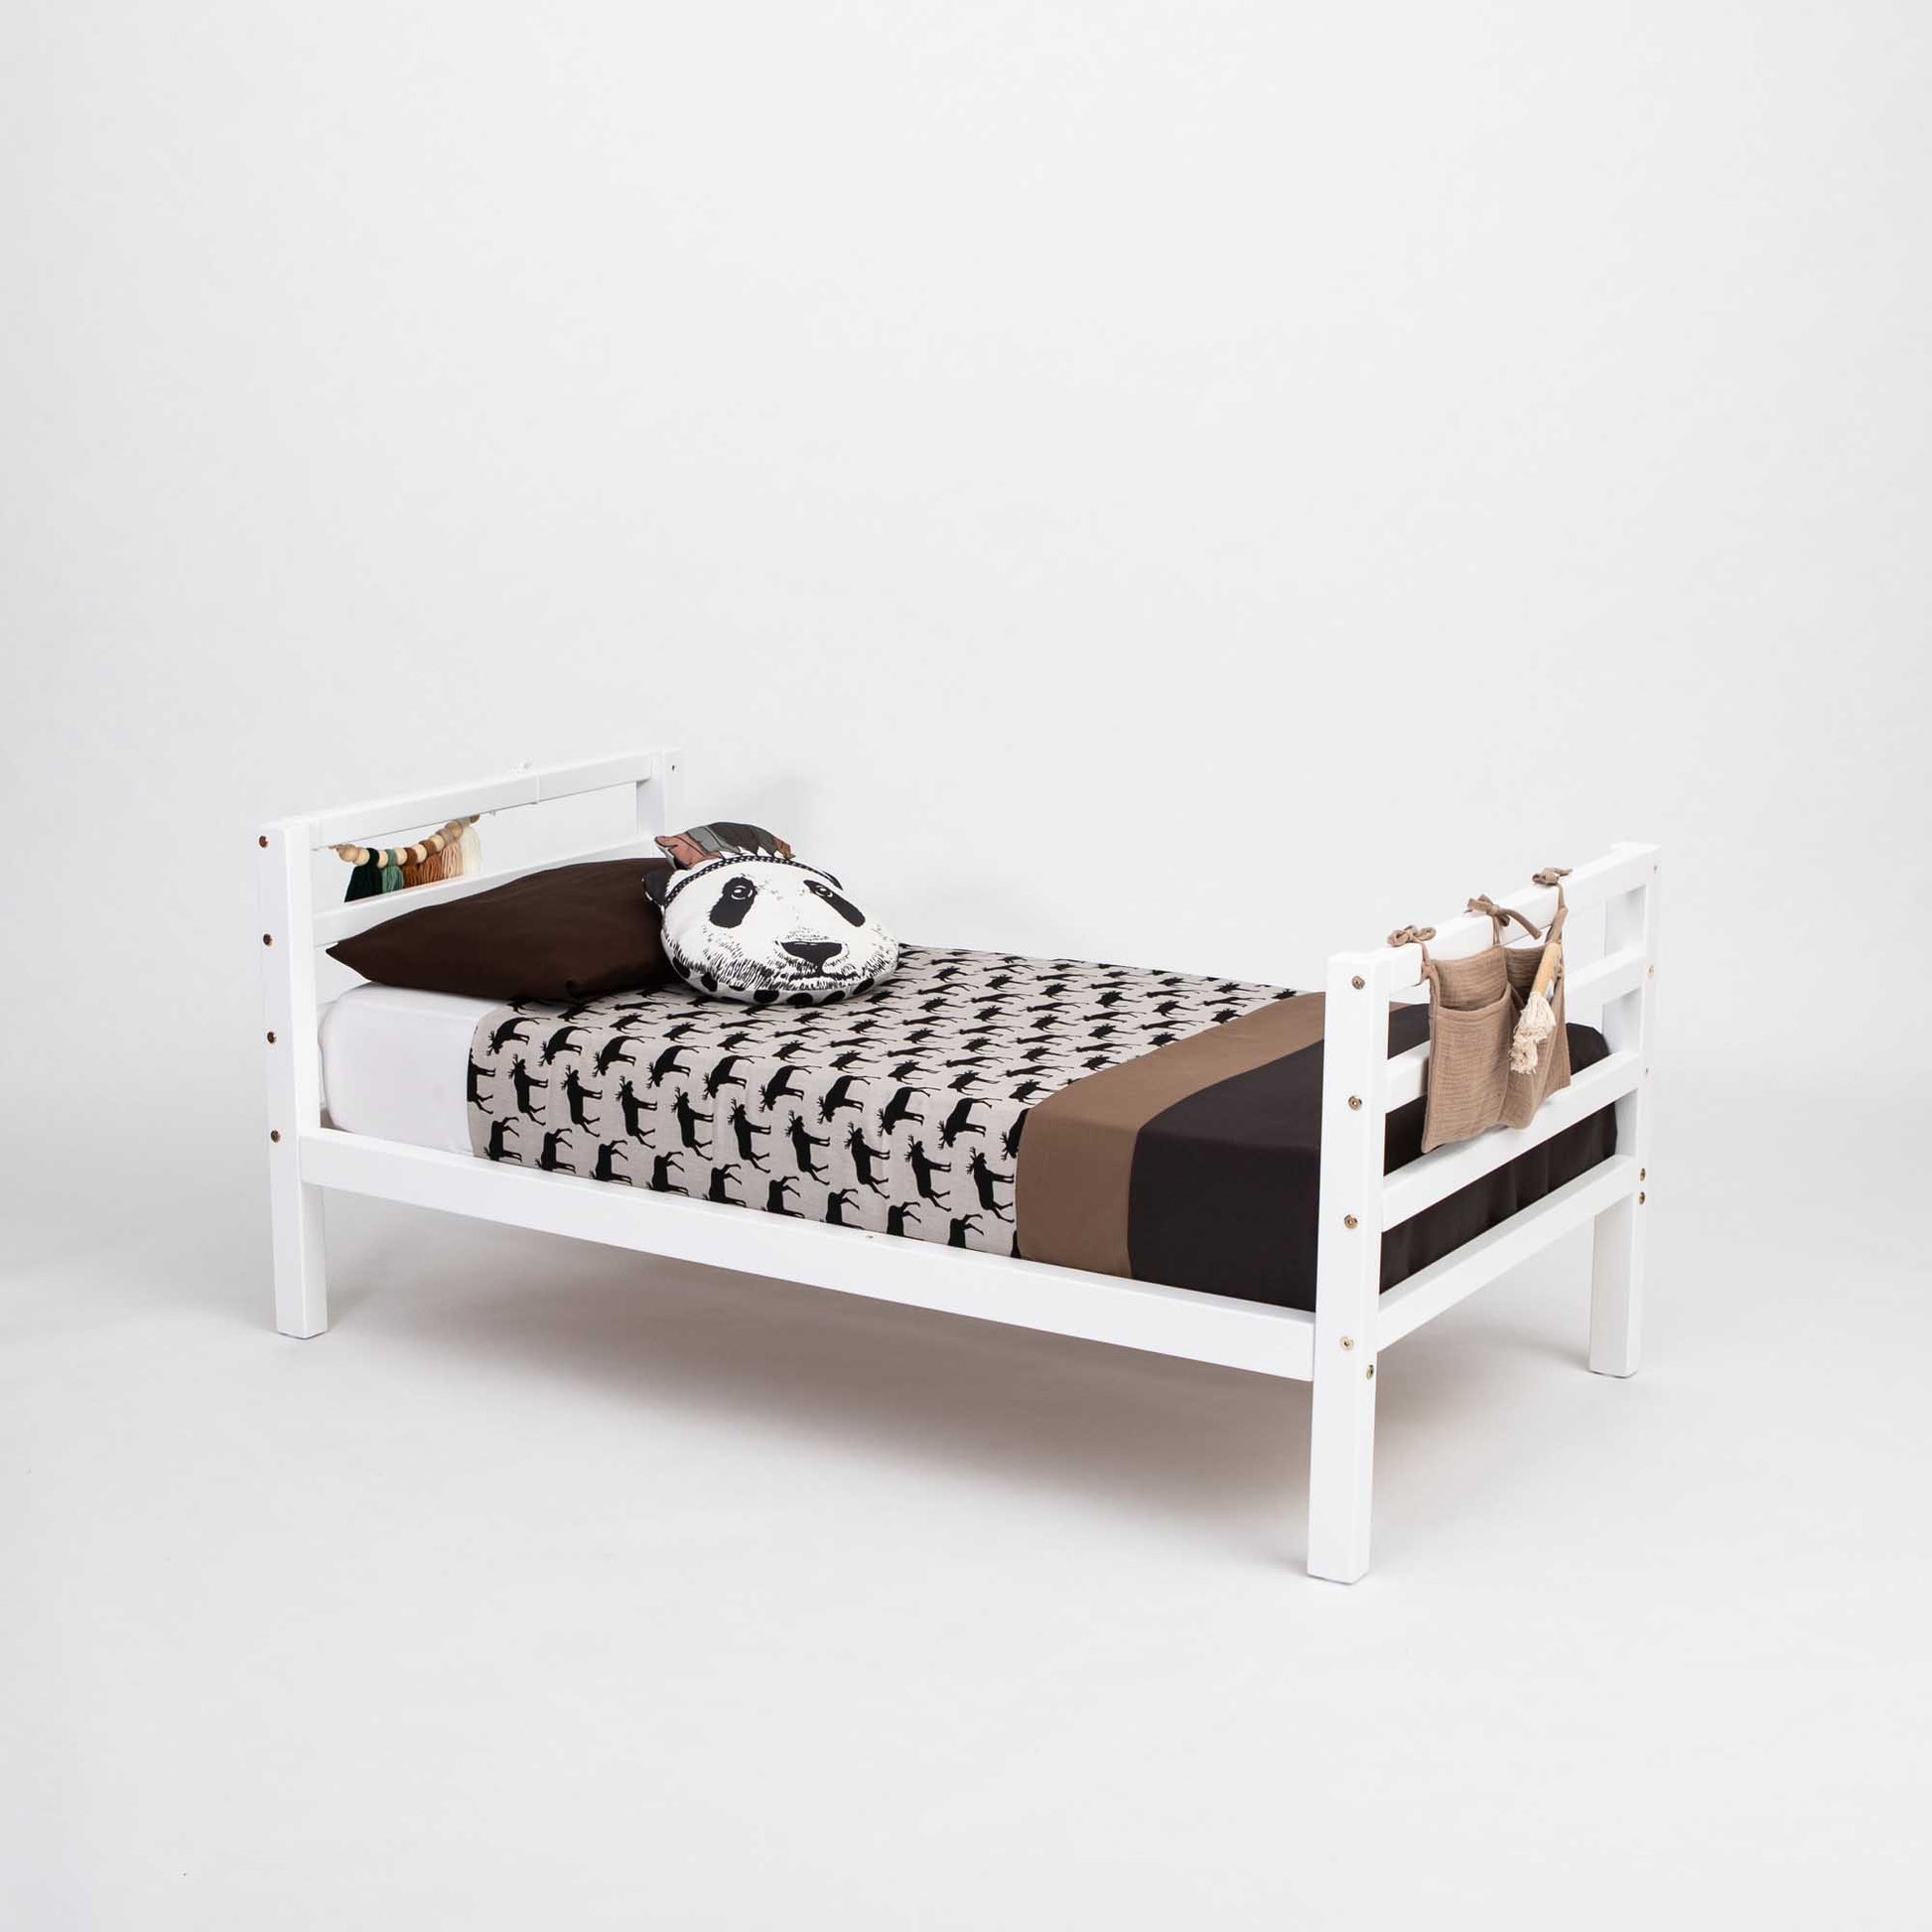 A long-lasting Sweet Home From Wood 2-in-1 kids' bed with a horizontal rail headboard and footboard, with a black and brown pillow, perfect to grow with your child.